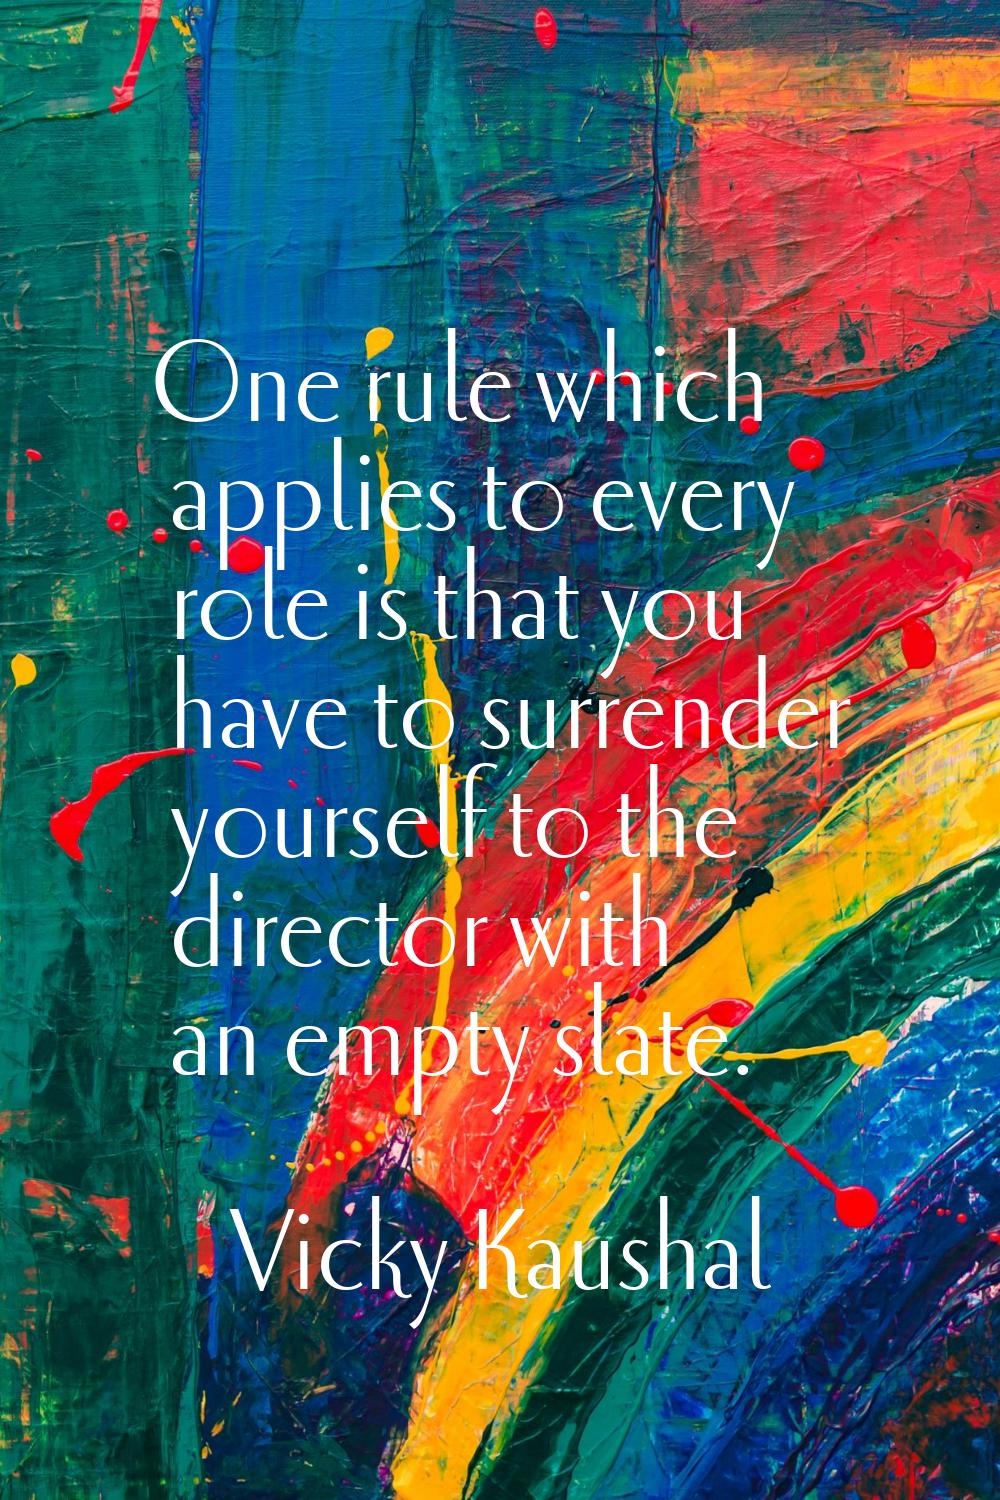 One rule which applies to every role is that you have to surrender yourself to the director with an